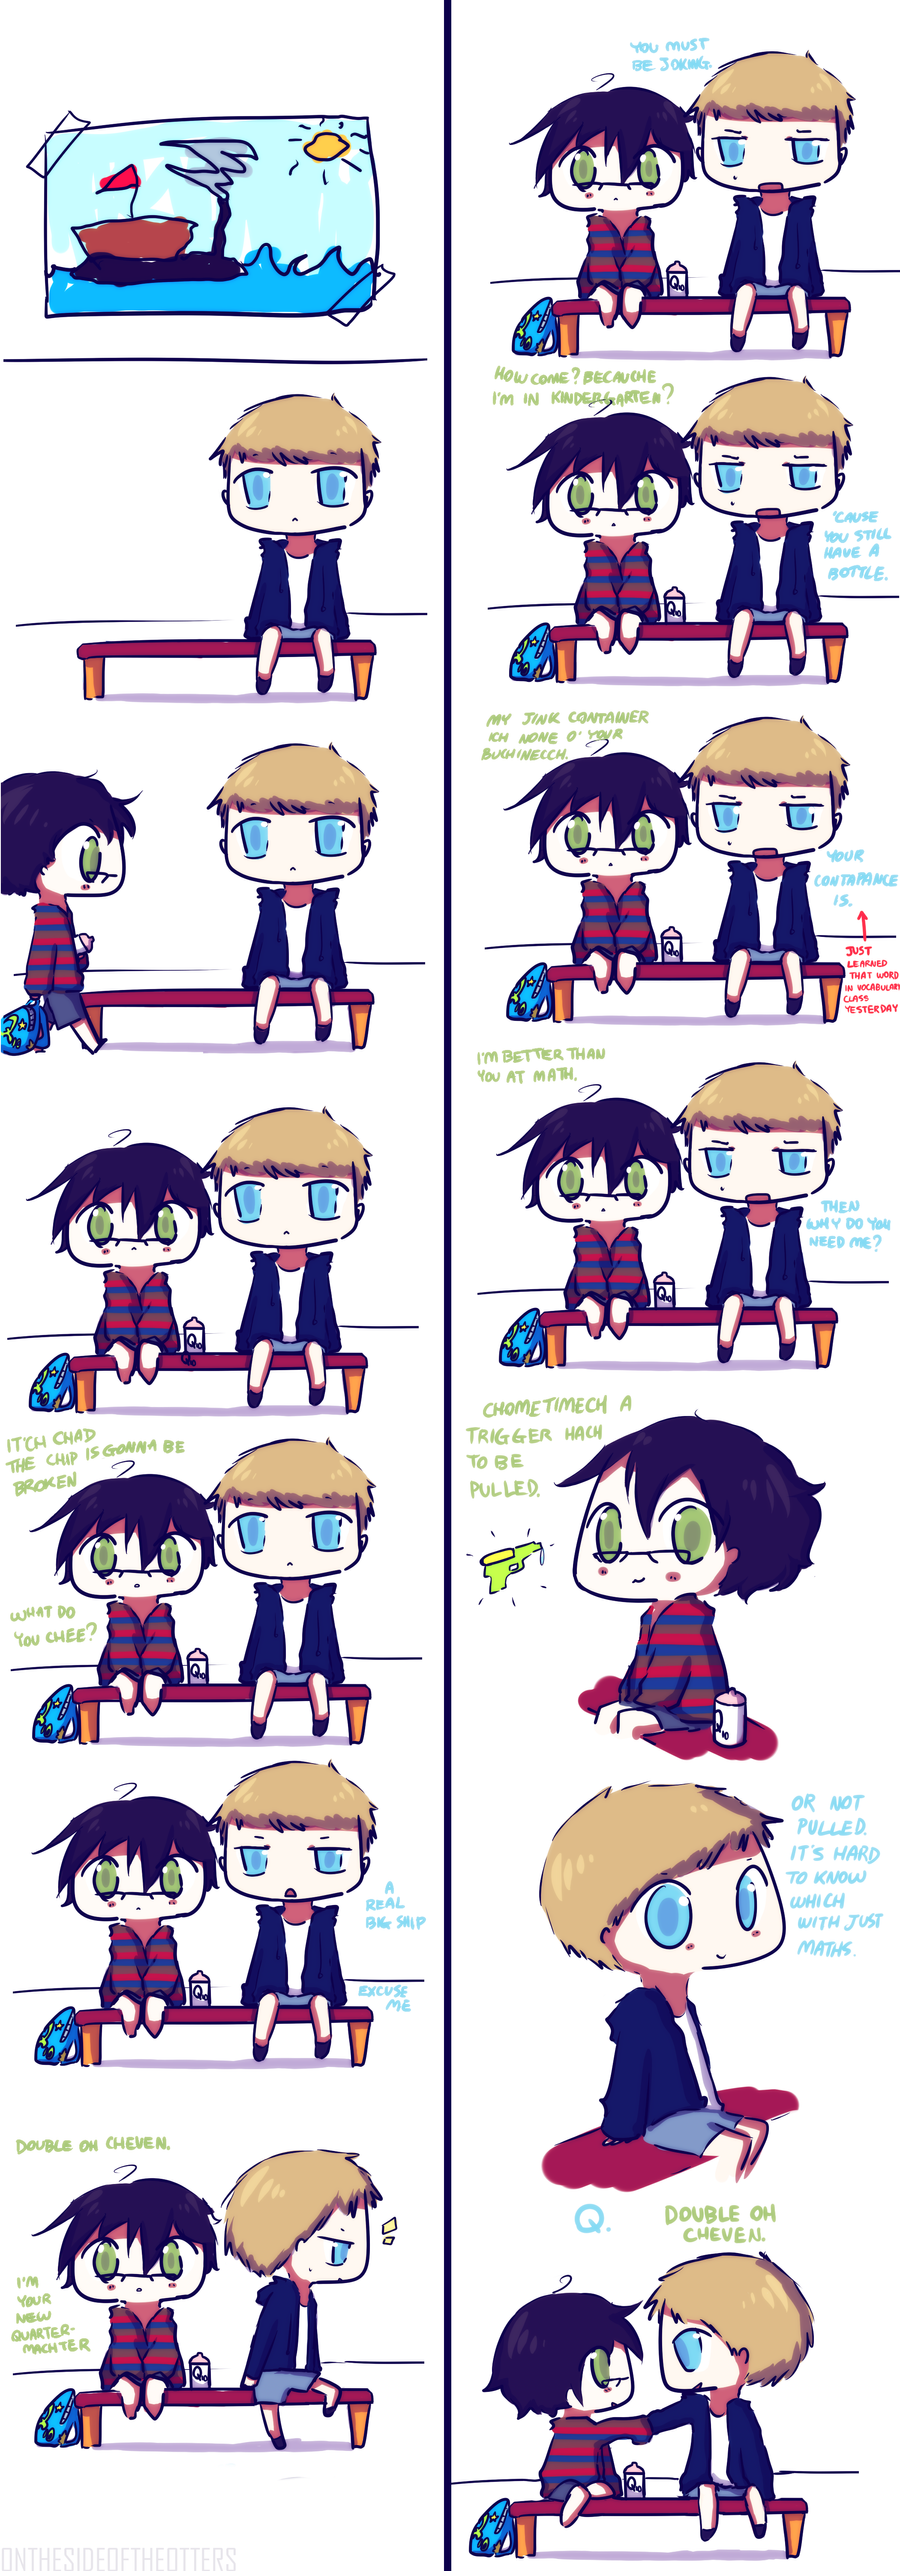 baby_skyfall__james_and_q__s_first_meeting_by_bunnypopcorn-d5r4kc0.png